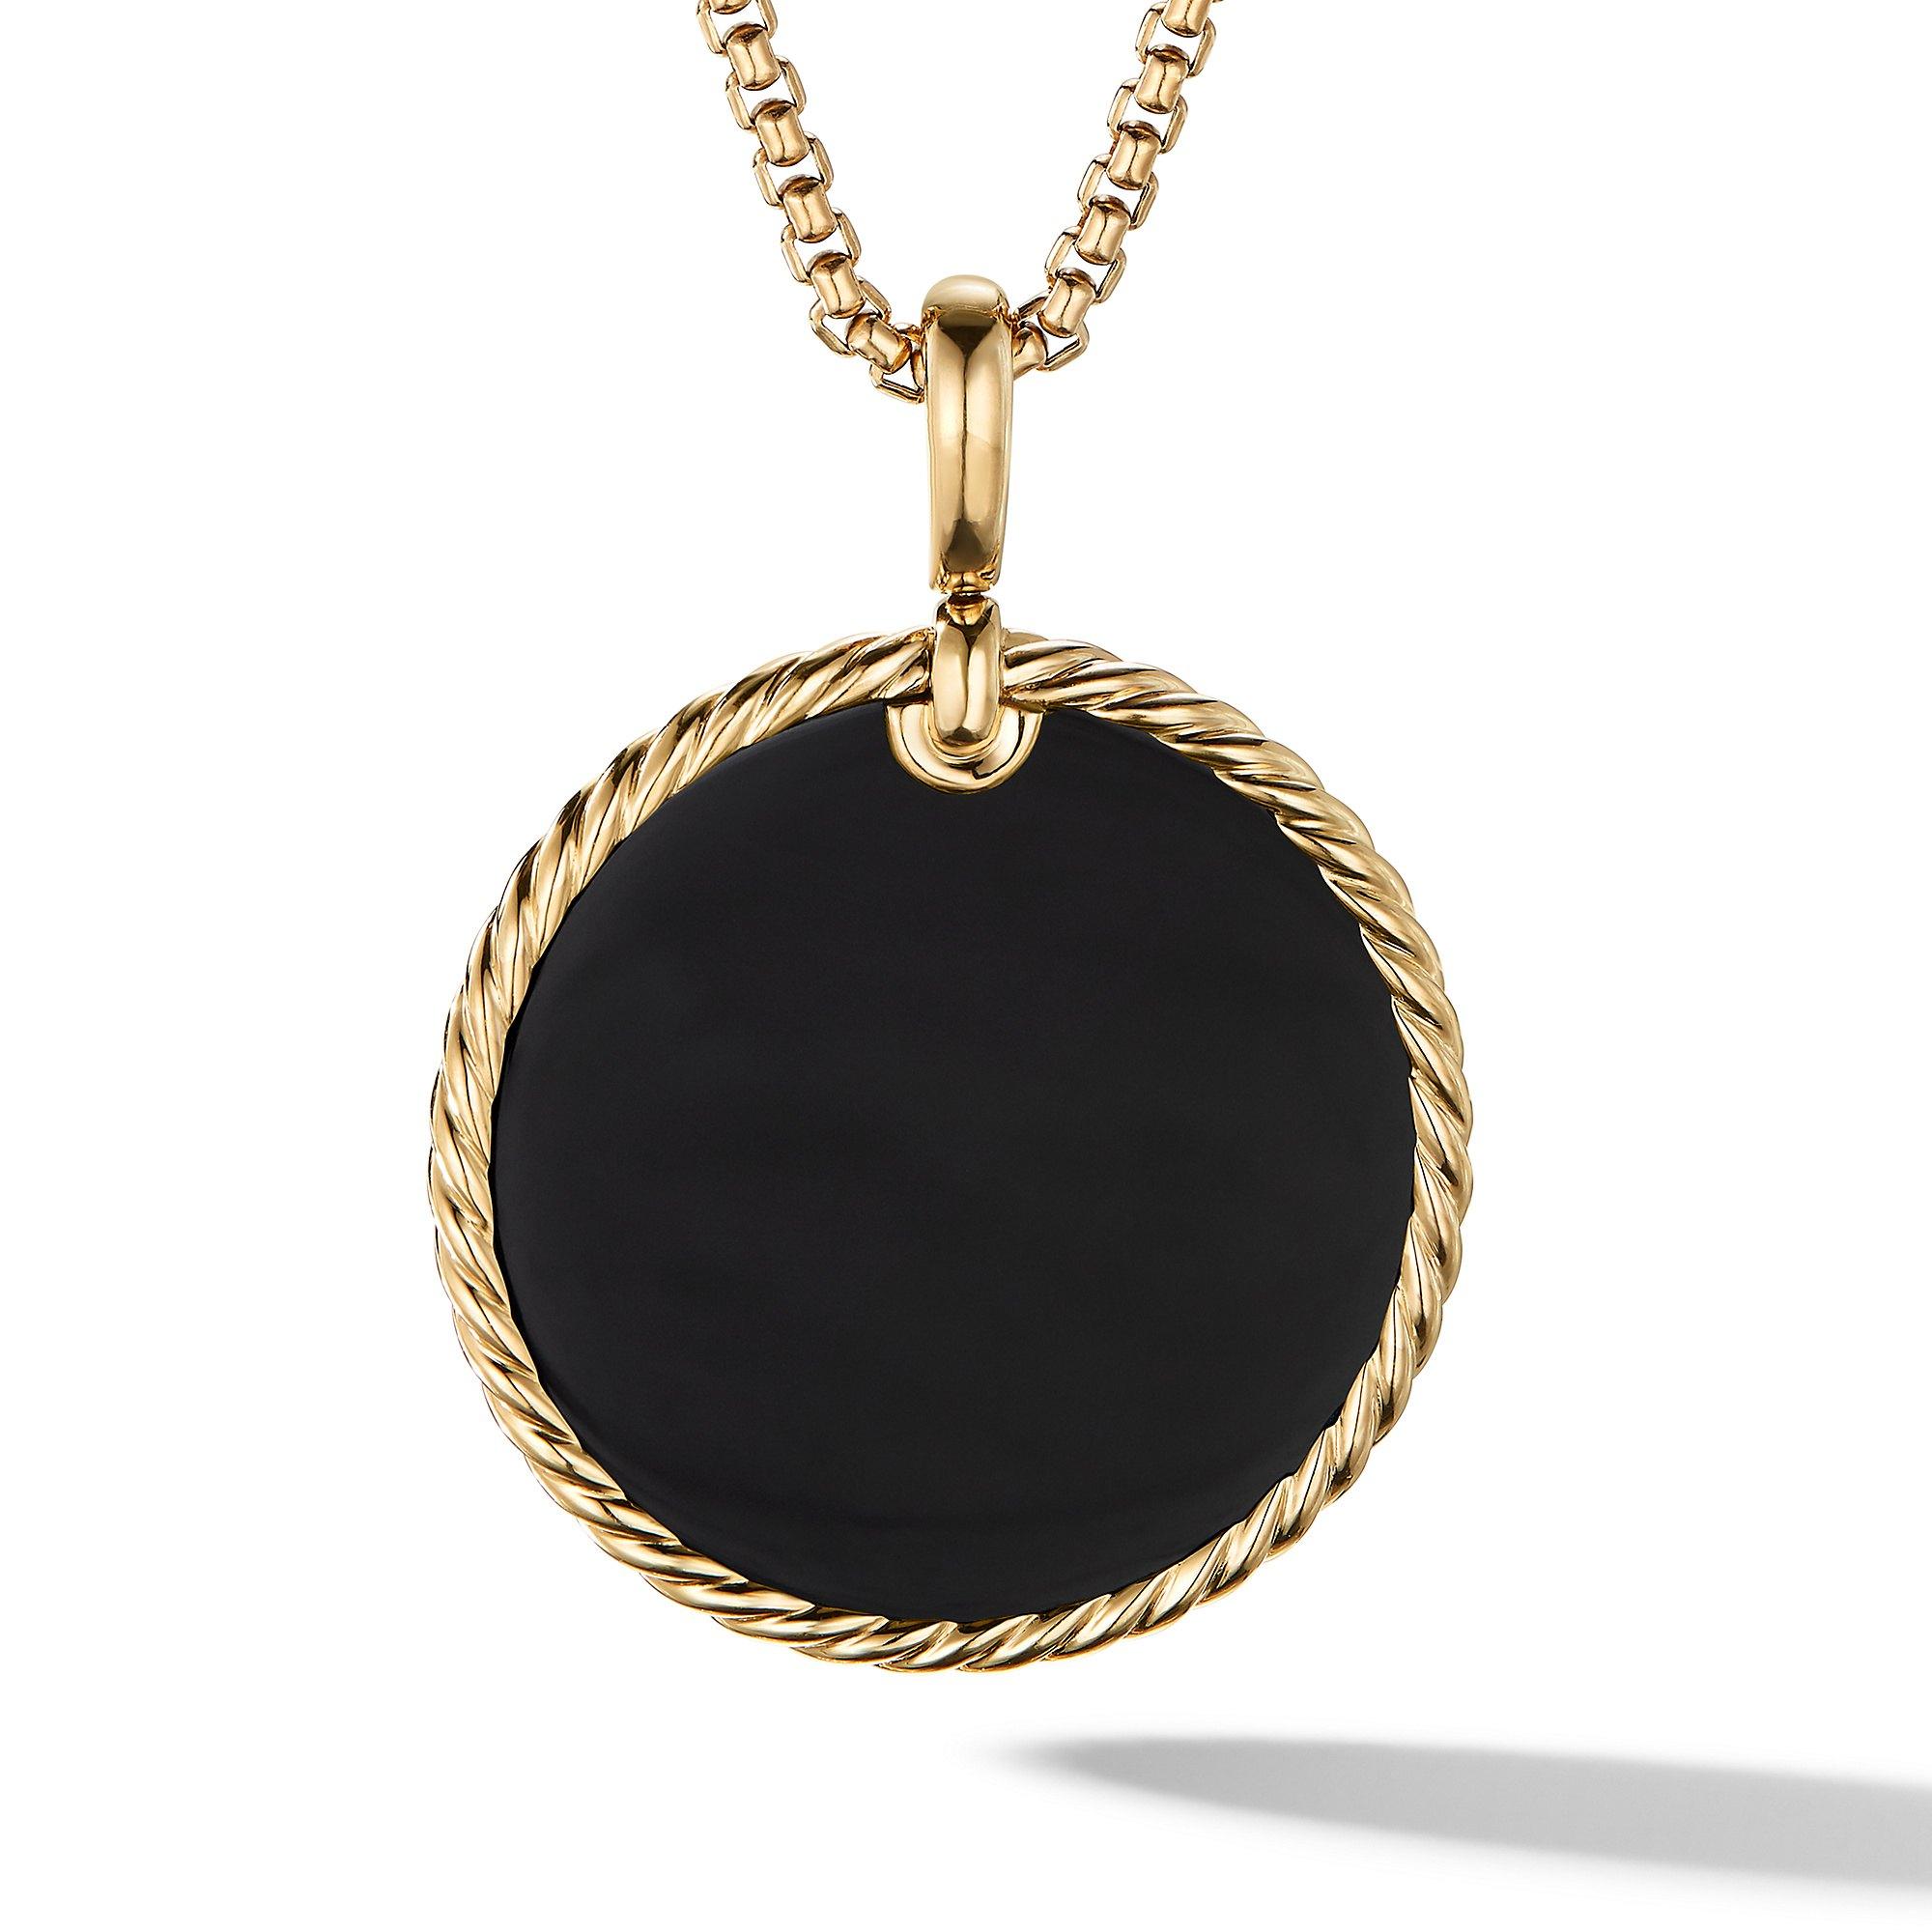 David Yurman Elements Disc Pendant in 18K Yellow Gold with Black Onyx and Mother Of Pearl, 32mm